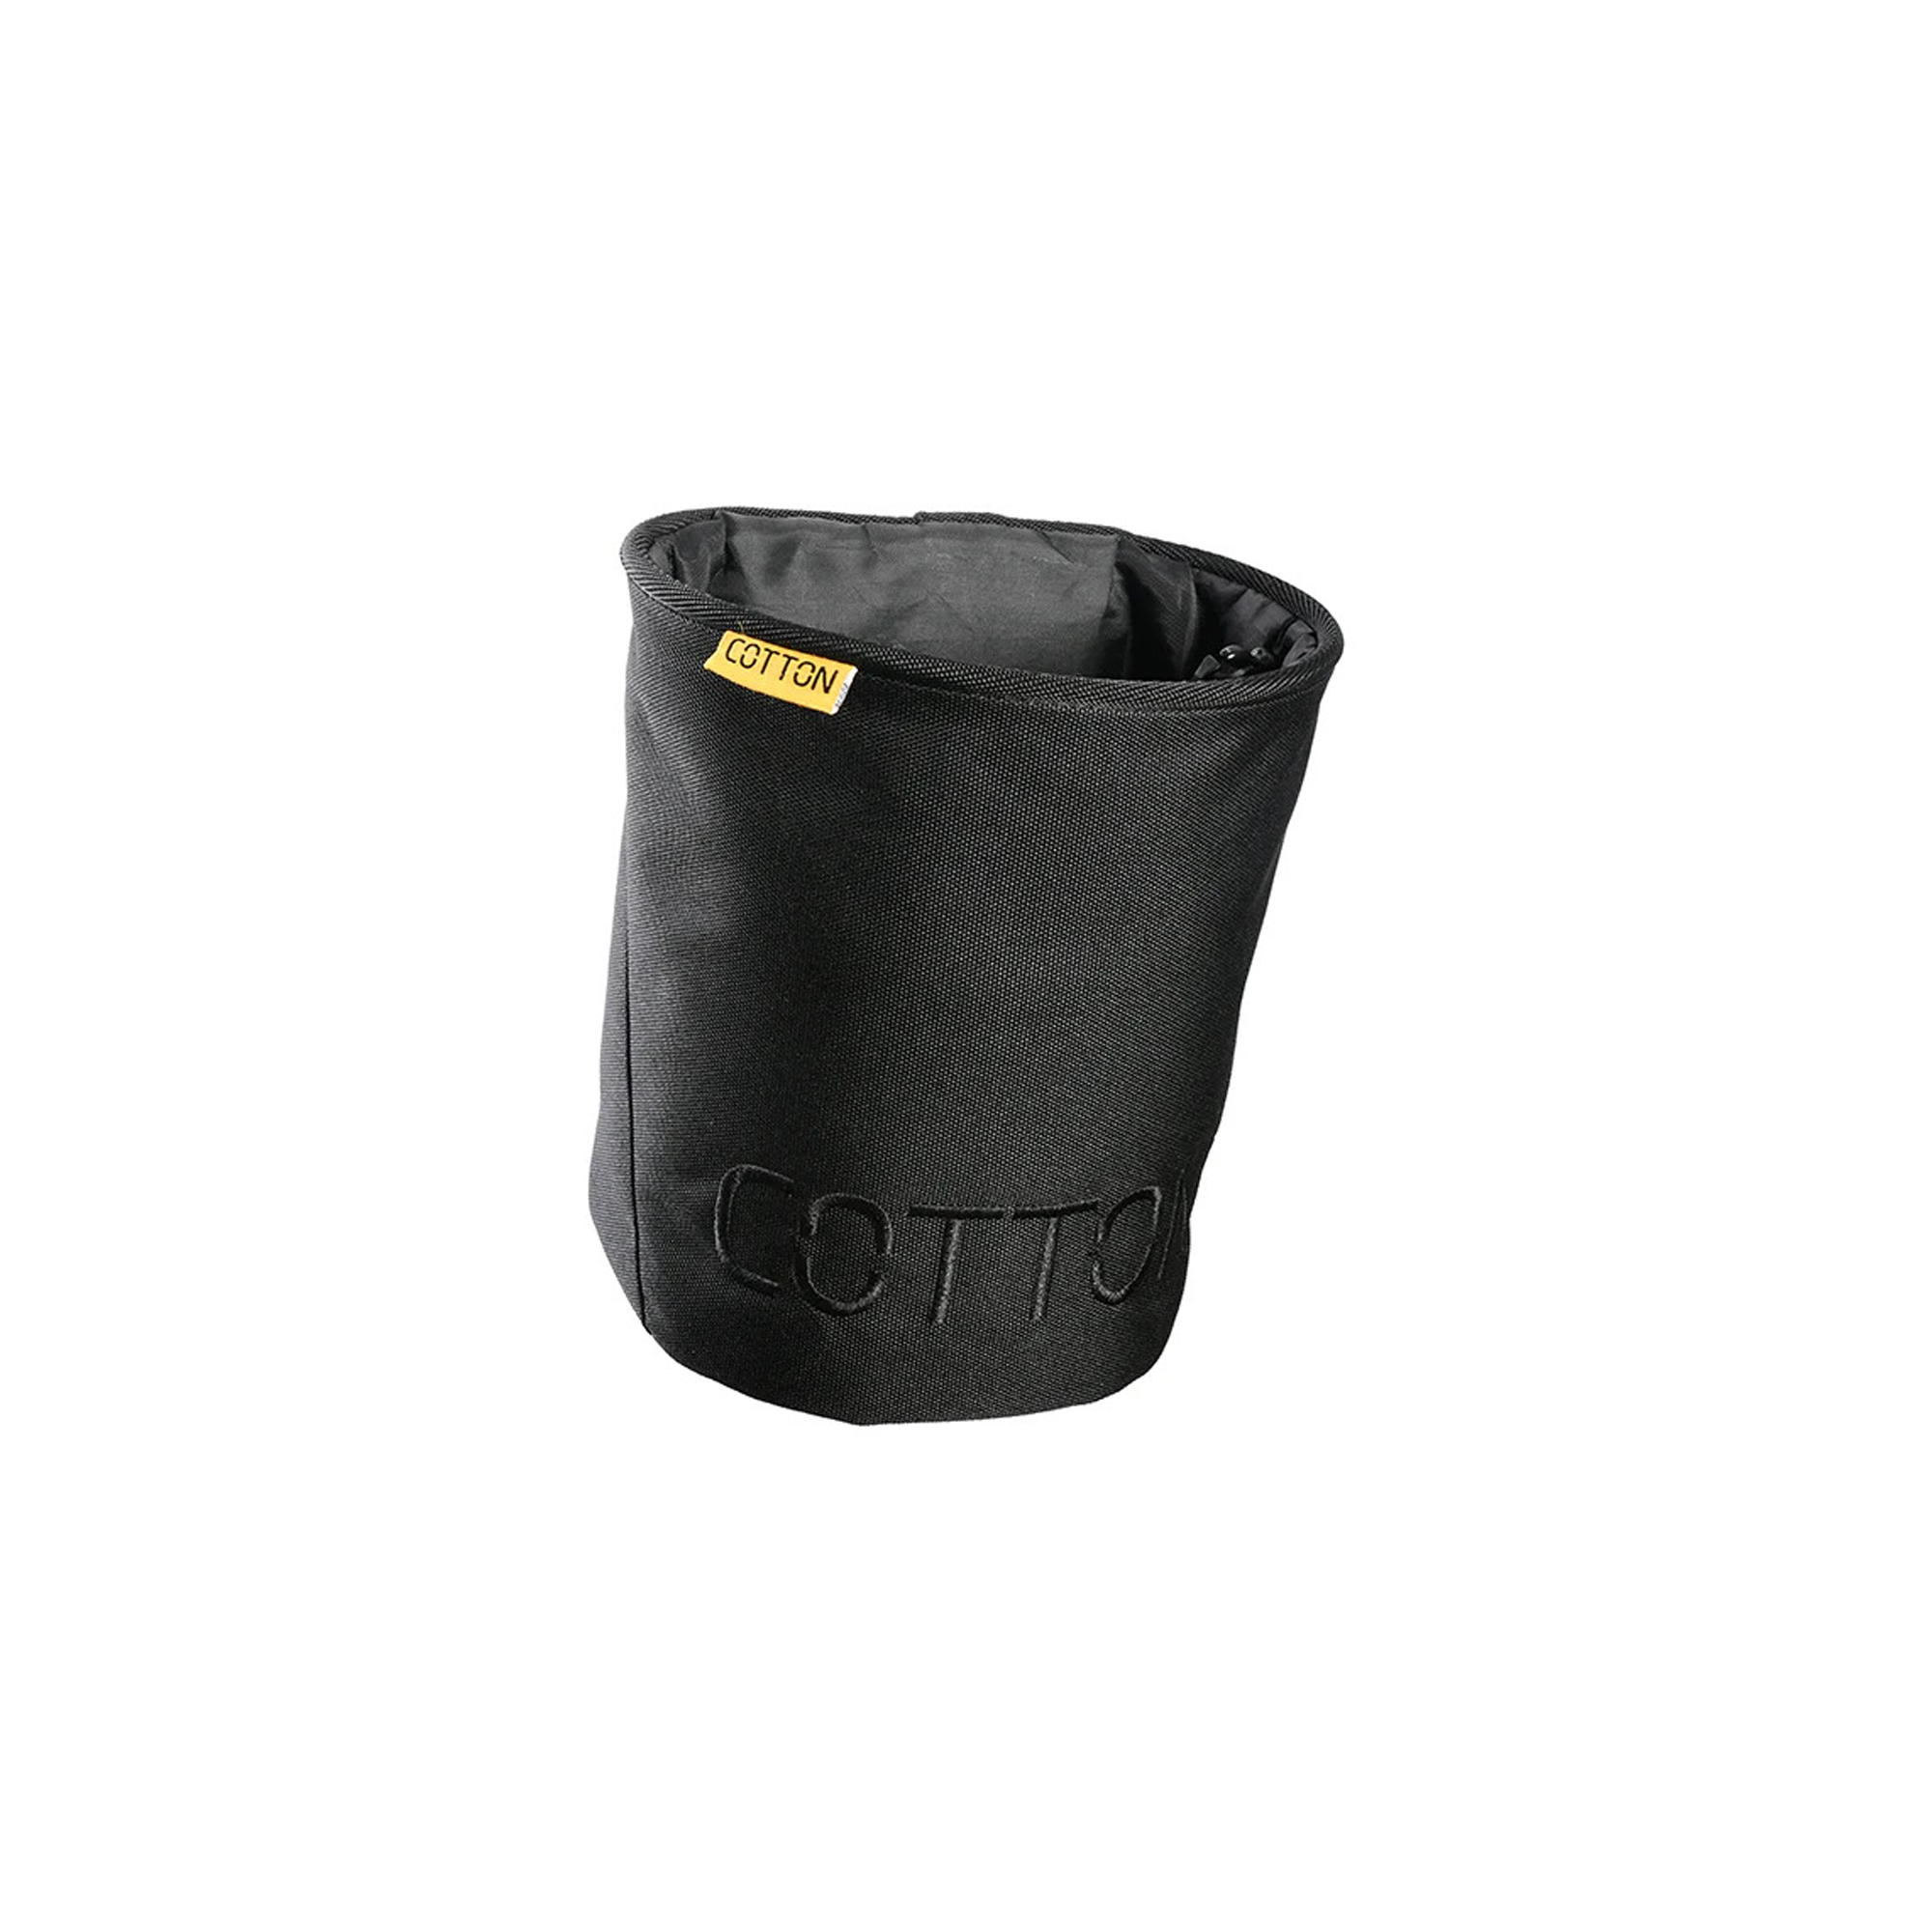 Cotton Carrier Lens Bucket DRY